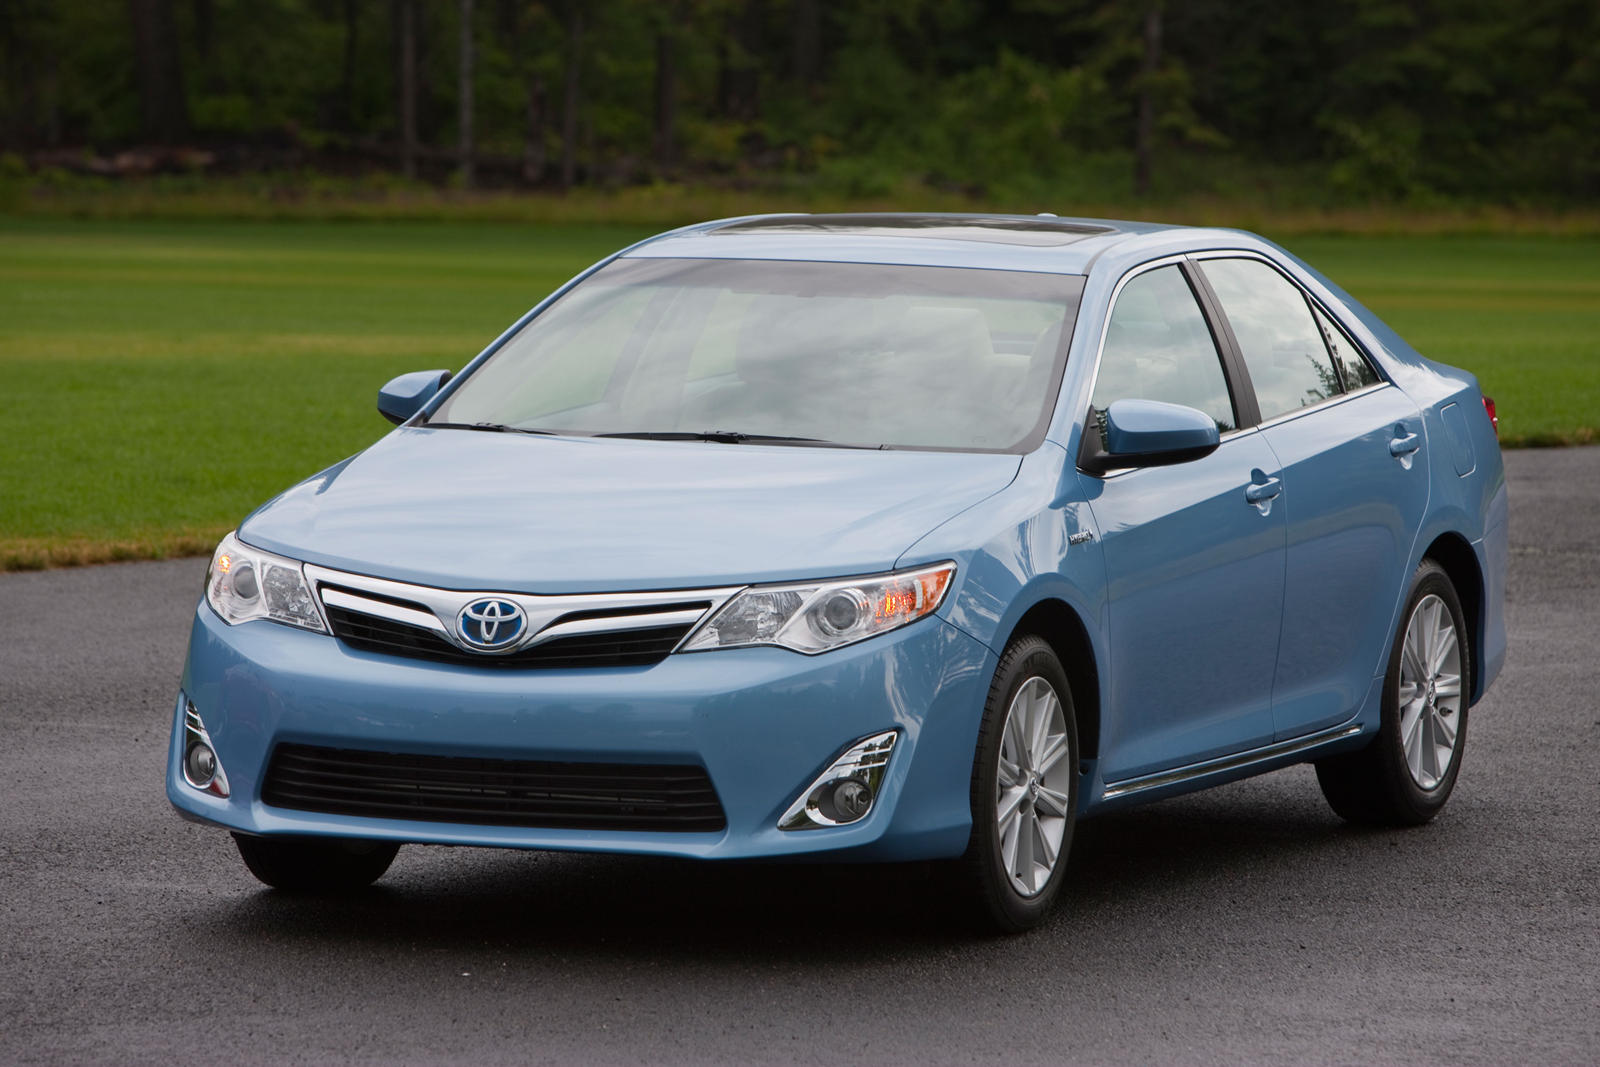 2014 Toyota Camry Hybrid Three Quarter Front Left Side View